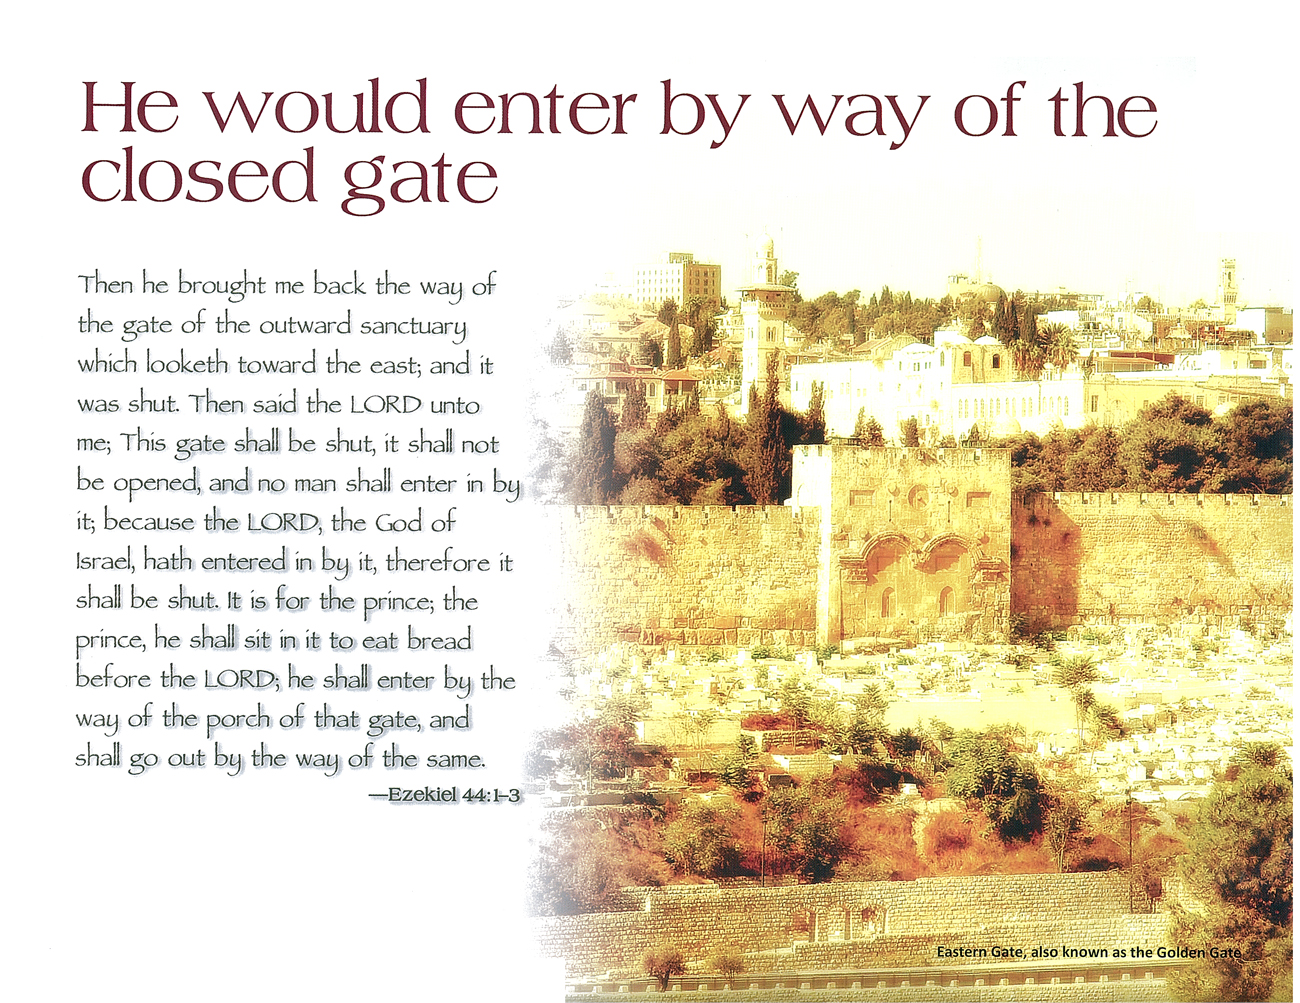 2010 Prophecy Calendar: October - He would enter by way of the closed gate